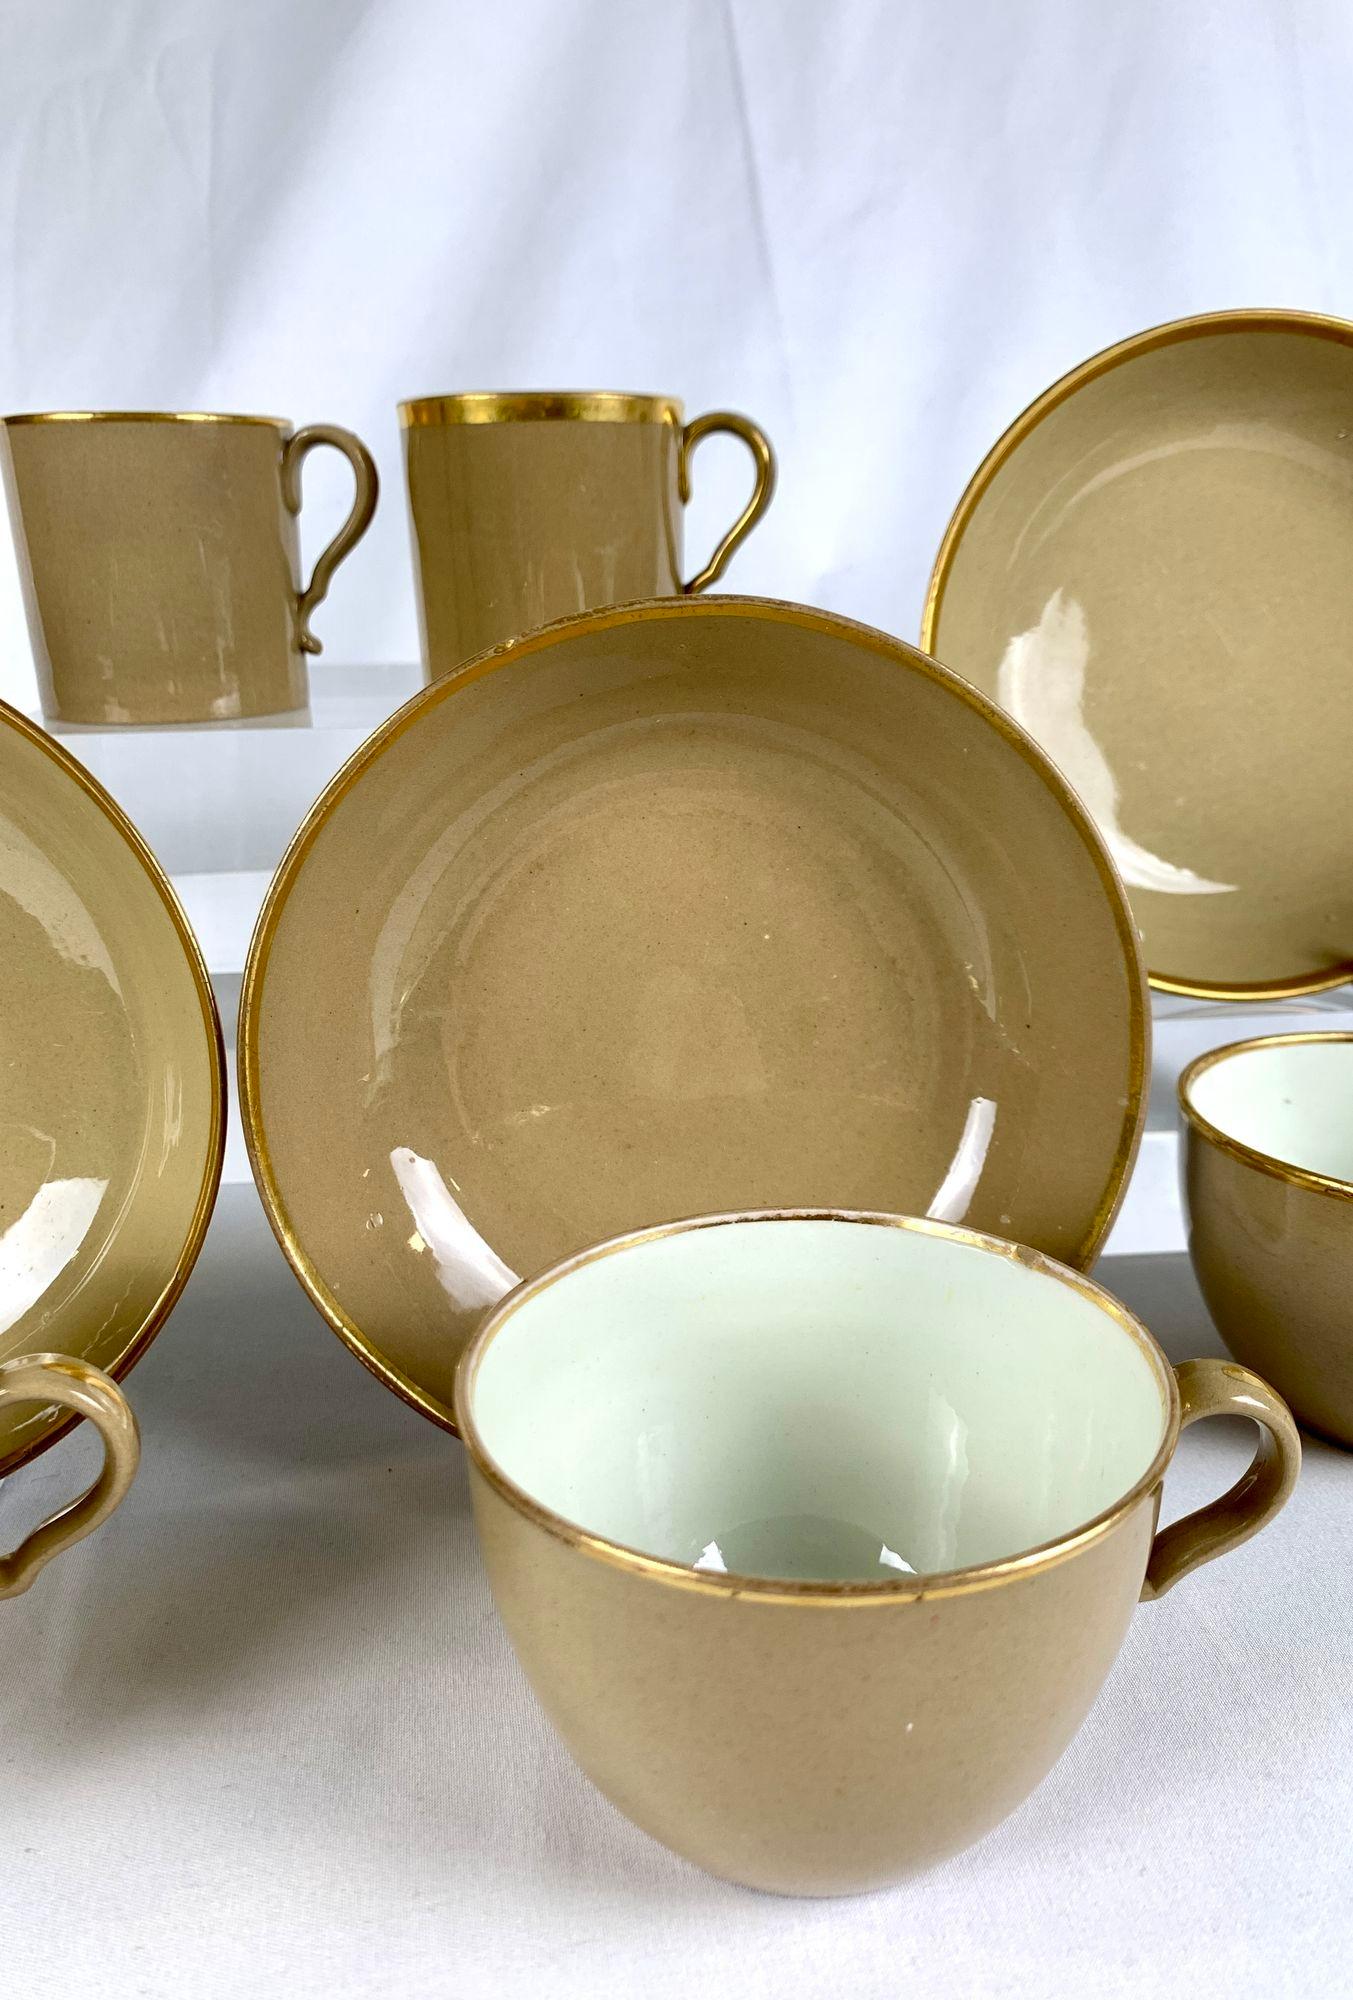 Earthenware Antique Drabware Group of Cups and Saucers England Circa 1825 For Sale